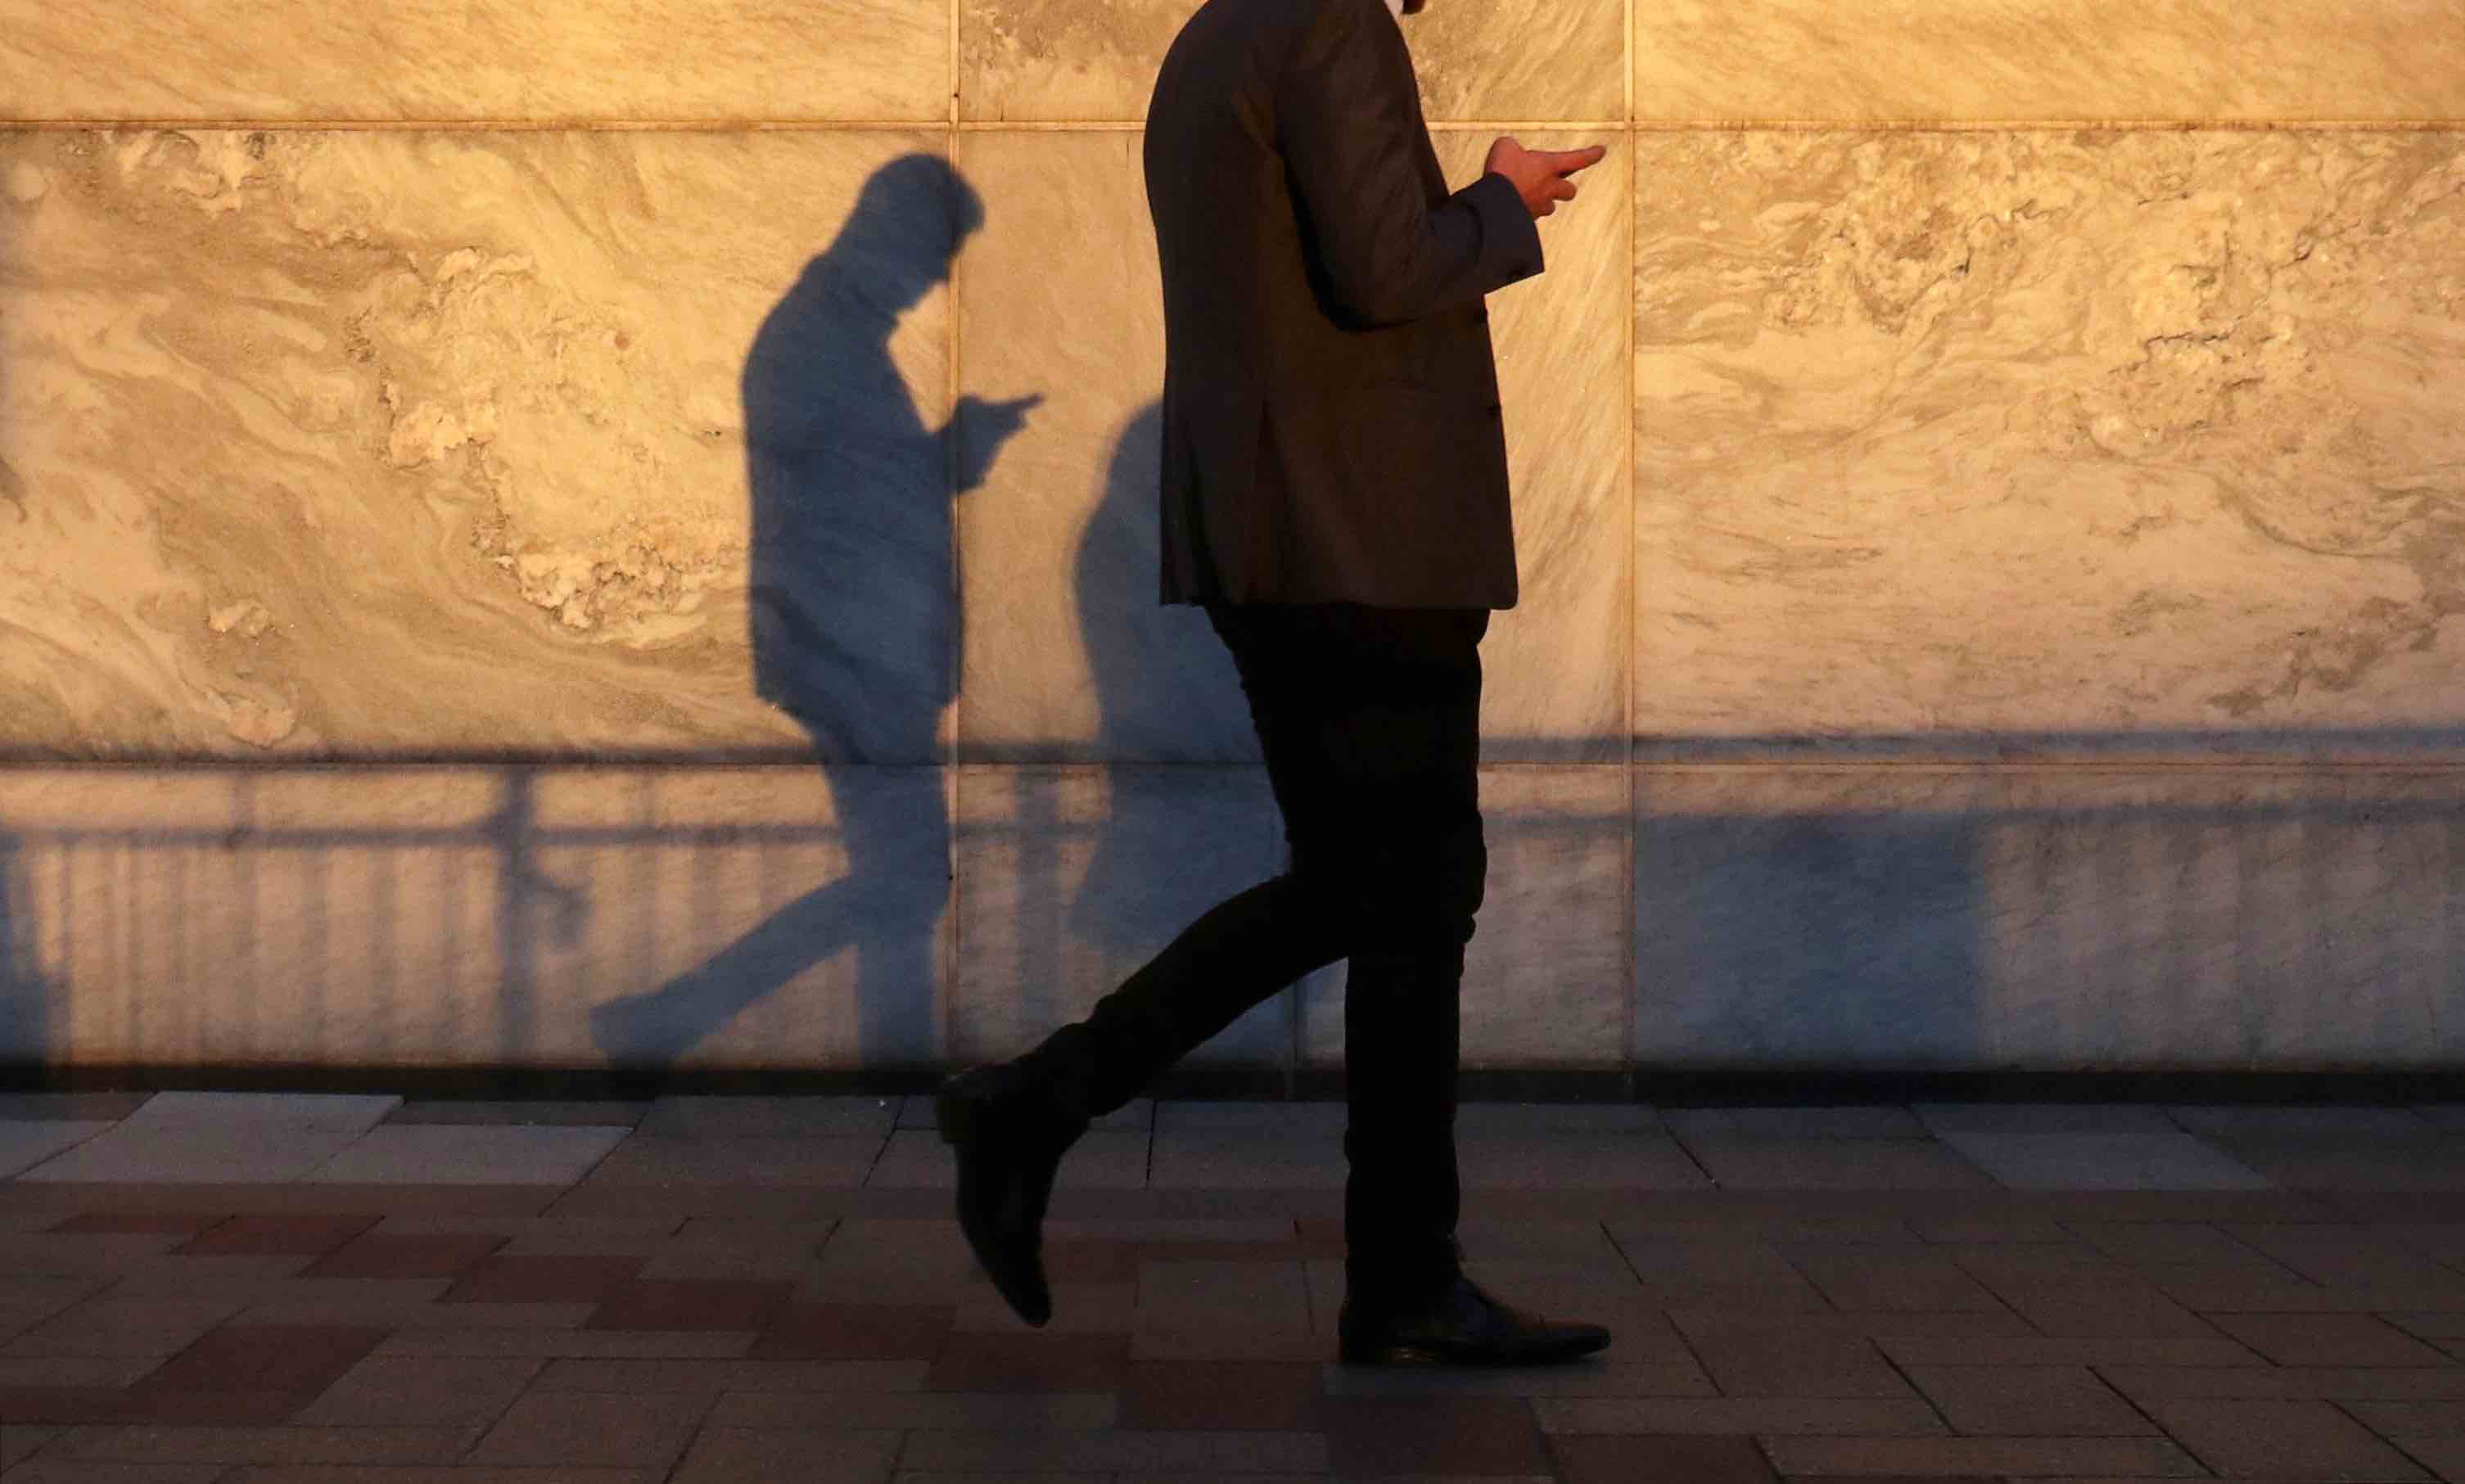 A man walks in London's Canary Wharf. REUTERS/Russell Boyce